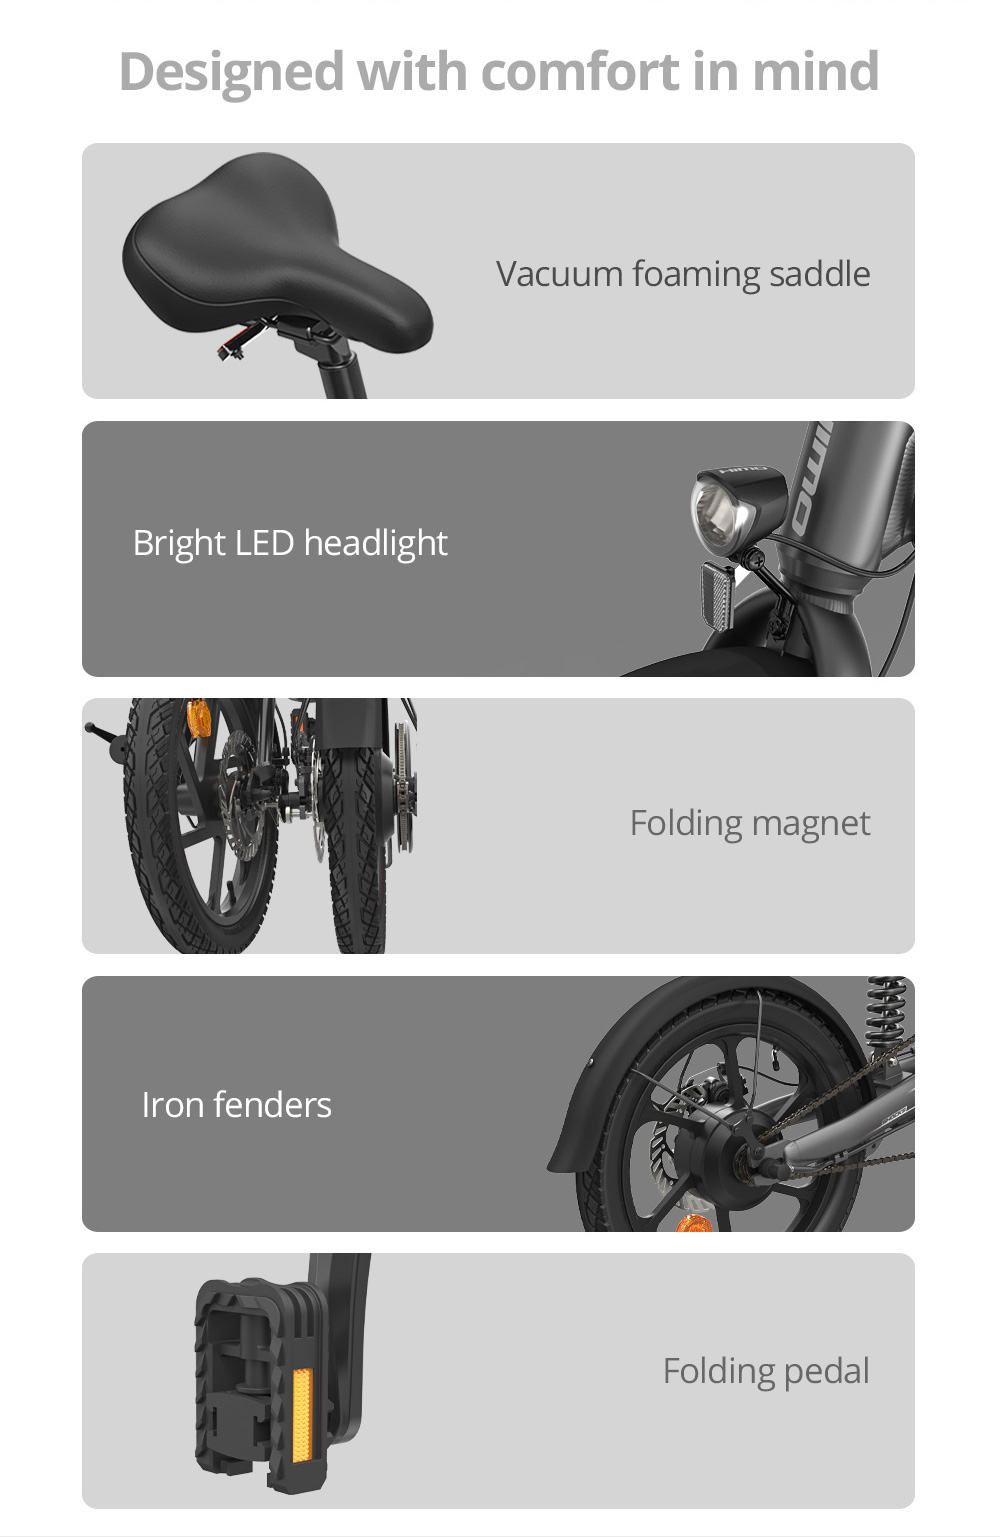 HIMO Z16 MAX Folding Electric Bicycle 16 Inch 250W Hall Brushless DC Motor Dual Disc Brake Up To 80km Range Max Speed 25km/h 10Ah Battery IPX7 Waterproof Smart Display - Gray